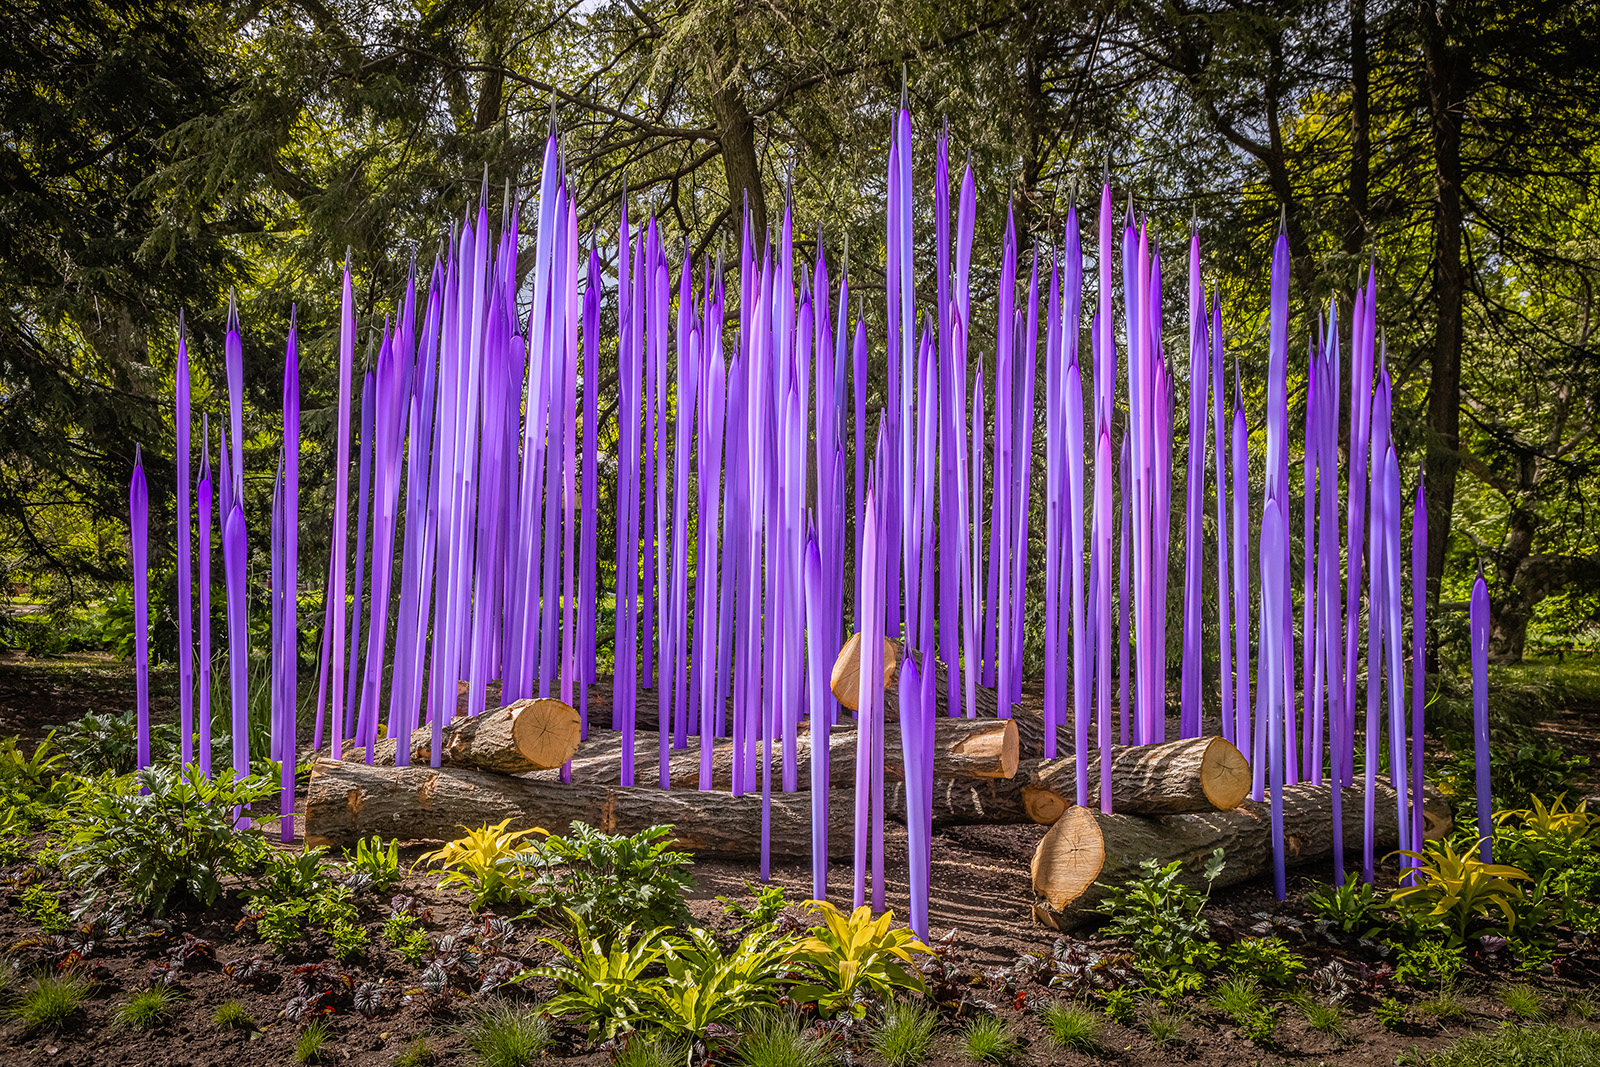 Dale Chihuly, Neodymium Reeds on Logs, 2022